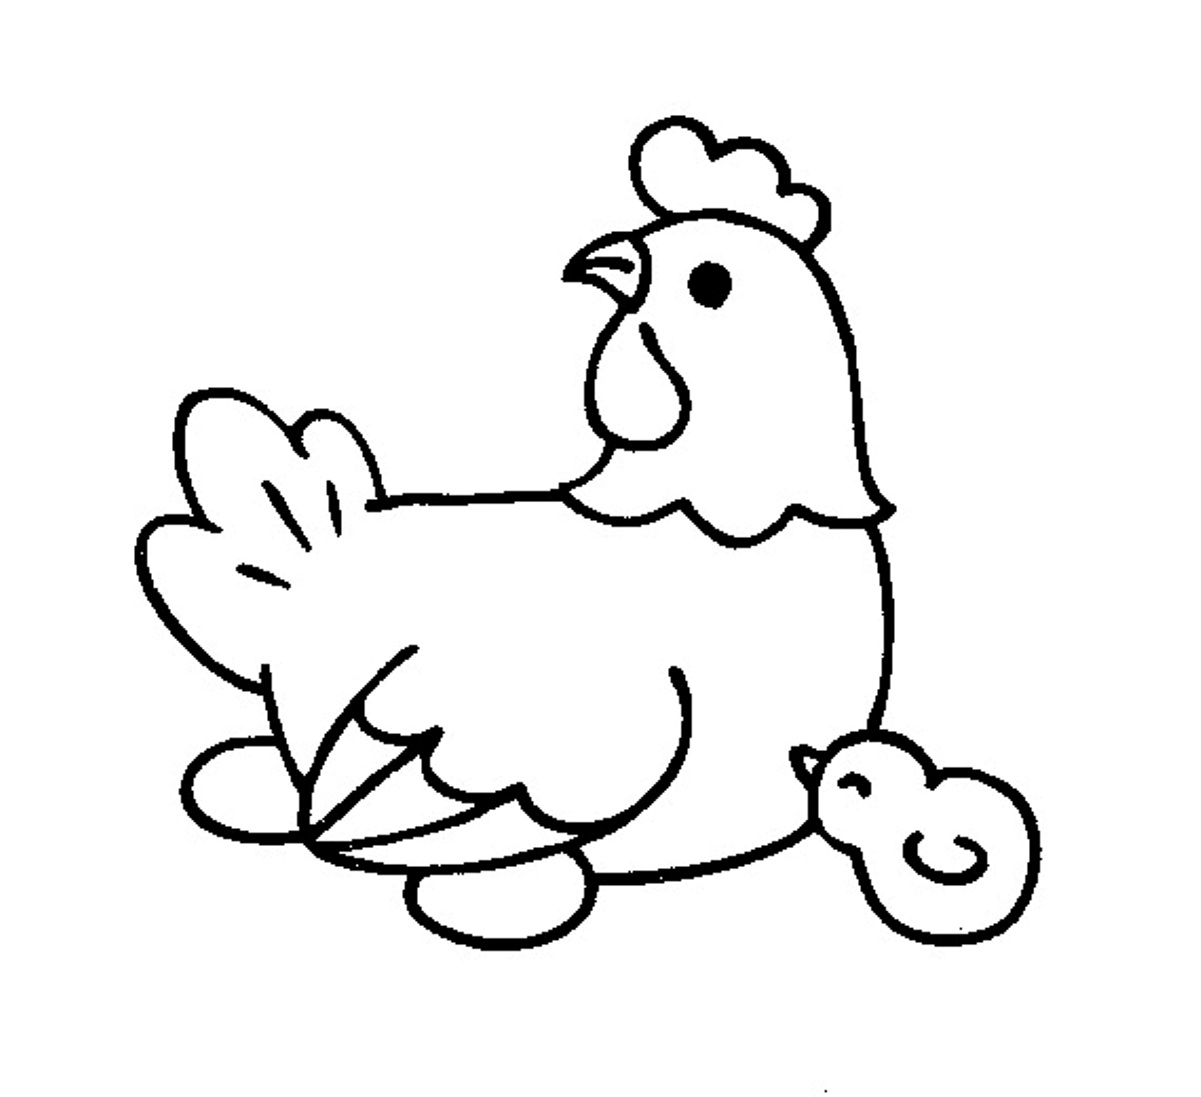 Cute Farm Animal S A Hen And Chick18d37 Coloring Page